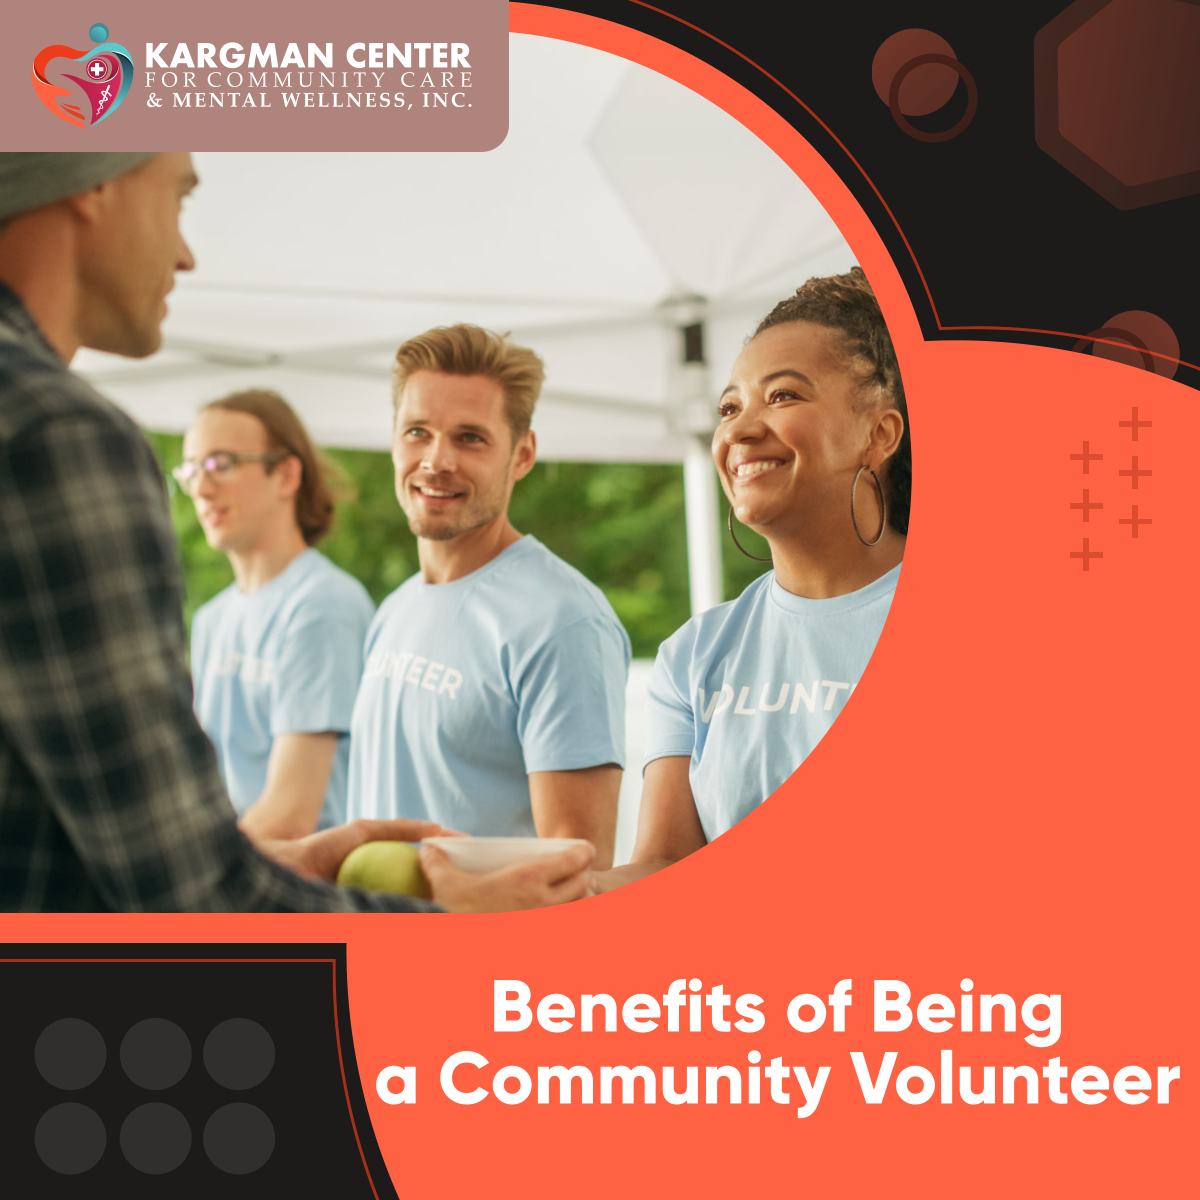 Volunteering is all about the willingness of a person to dedicate their time to helping someone in need for free. It may be informal where you help a friend or family, or formal such as charities. 

Read more: facebook.com/KargmanCenter/…

#CommunityVolunteer #DundalkMD